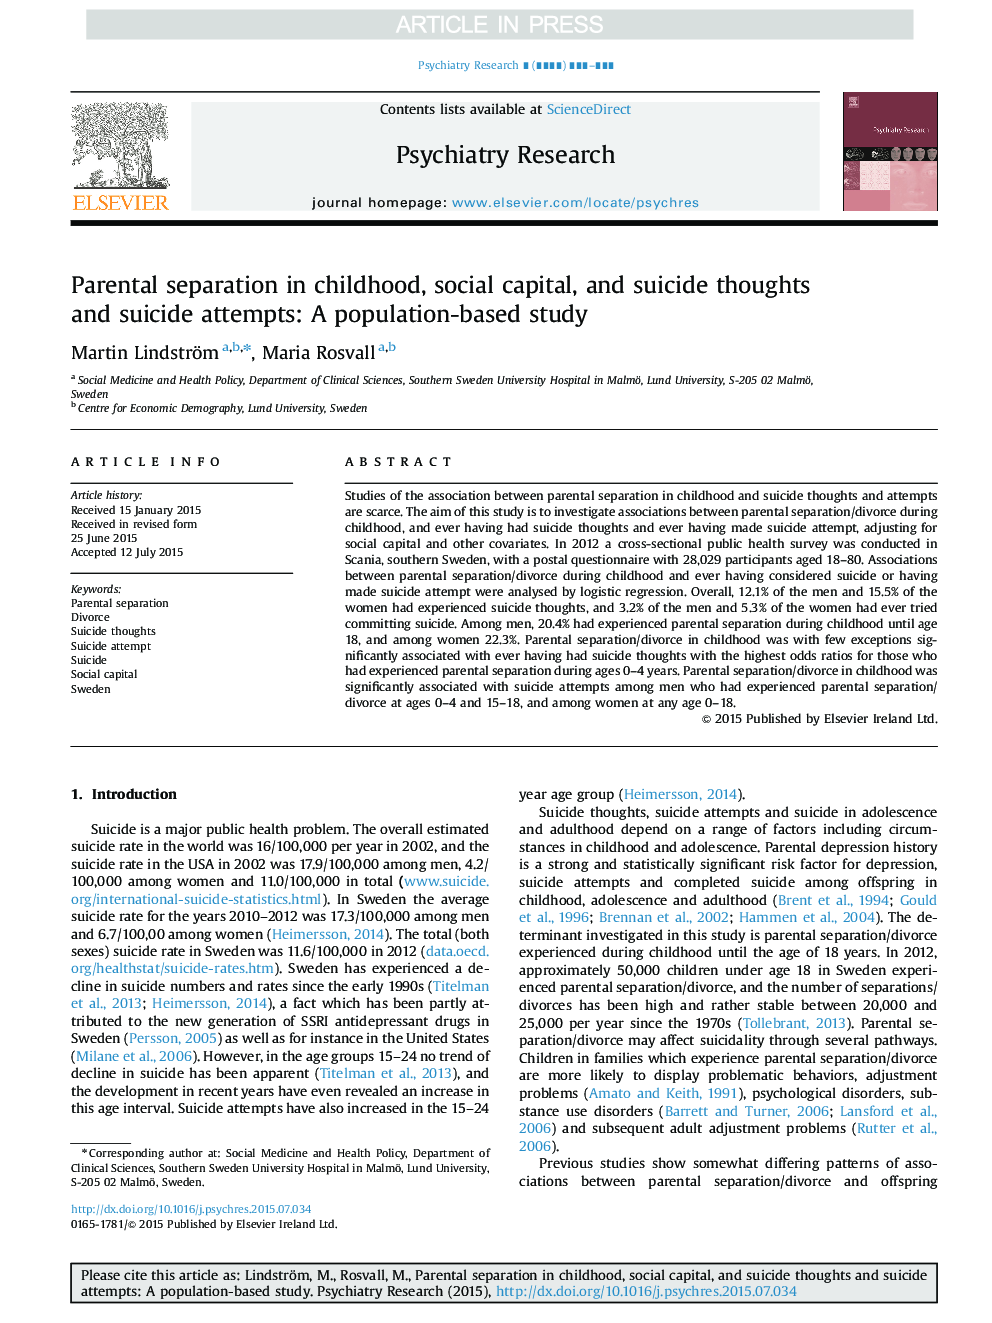 Parental separation in childhood, social capital, and suicide thoughts and suicide attempts: A population-based study